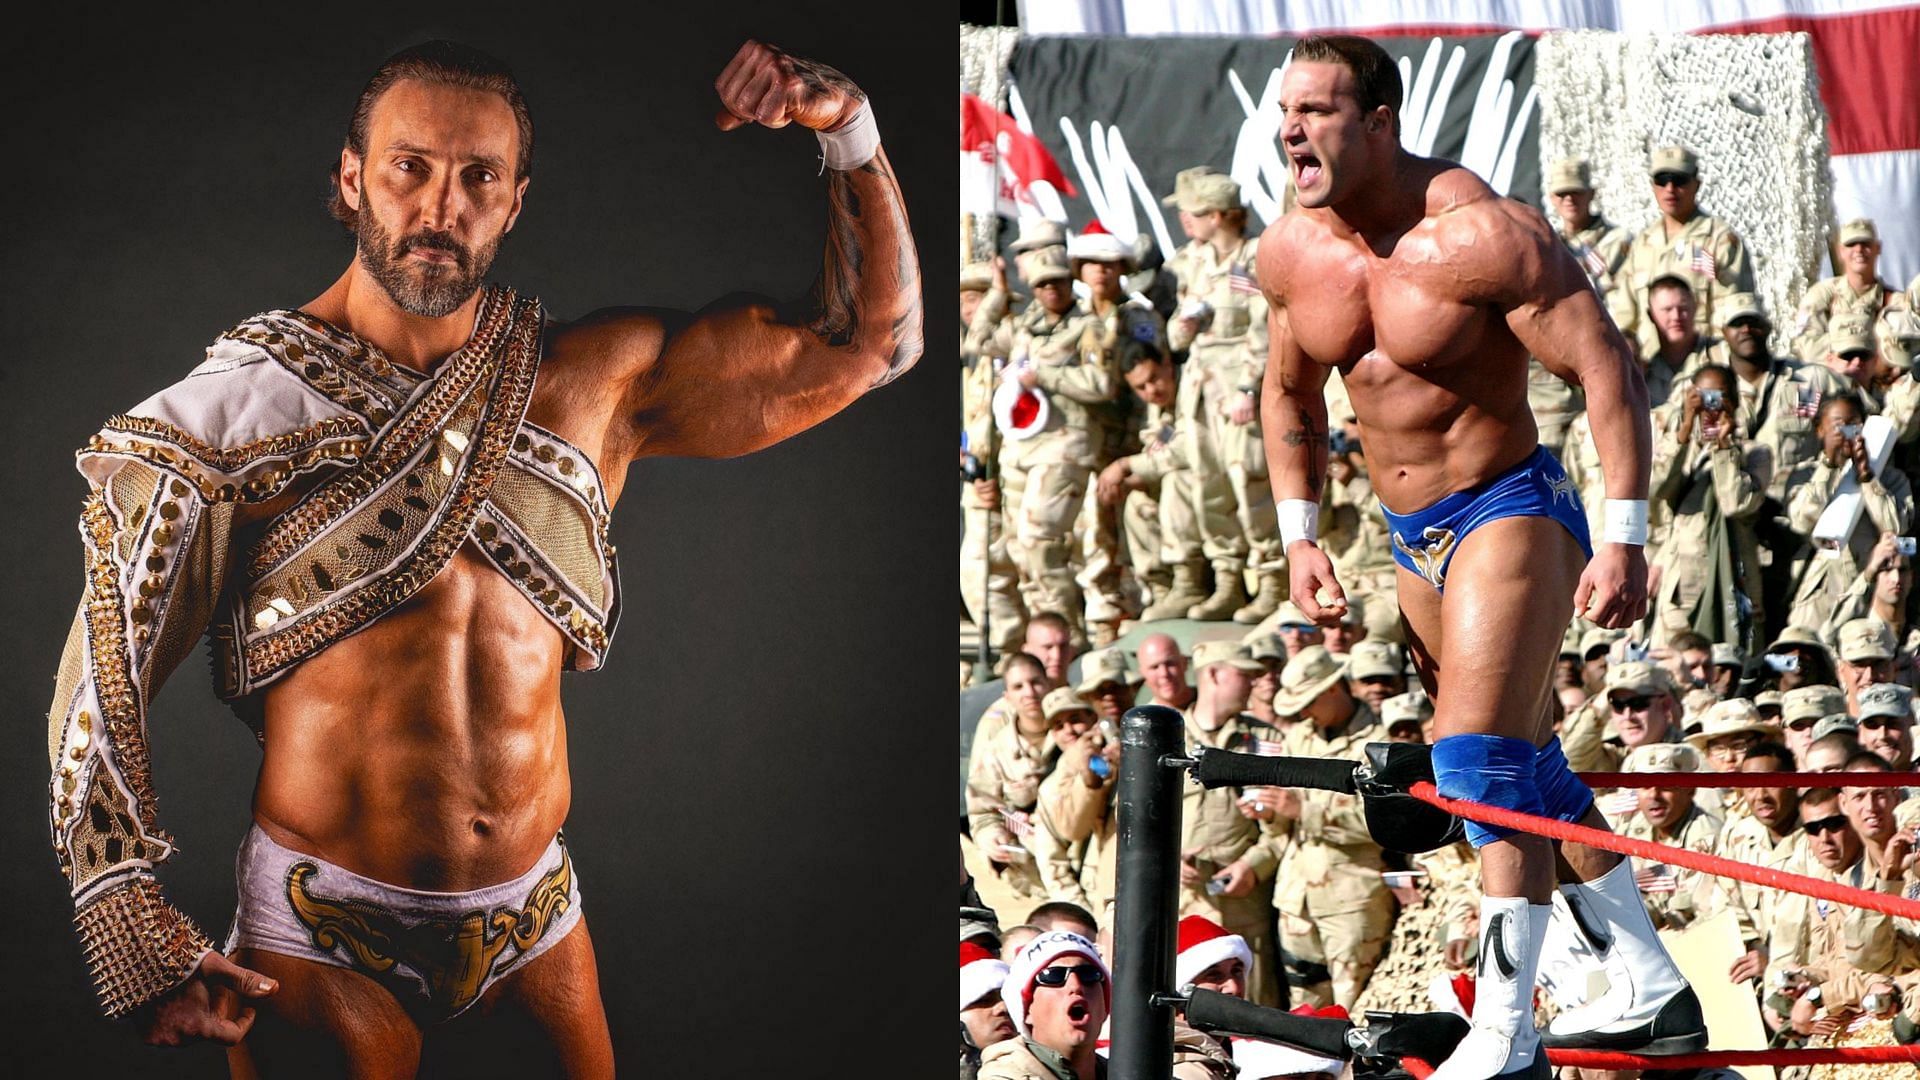 Chris Masters on potentially returning to WWE and clashing with current